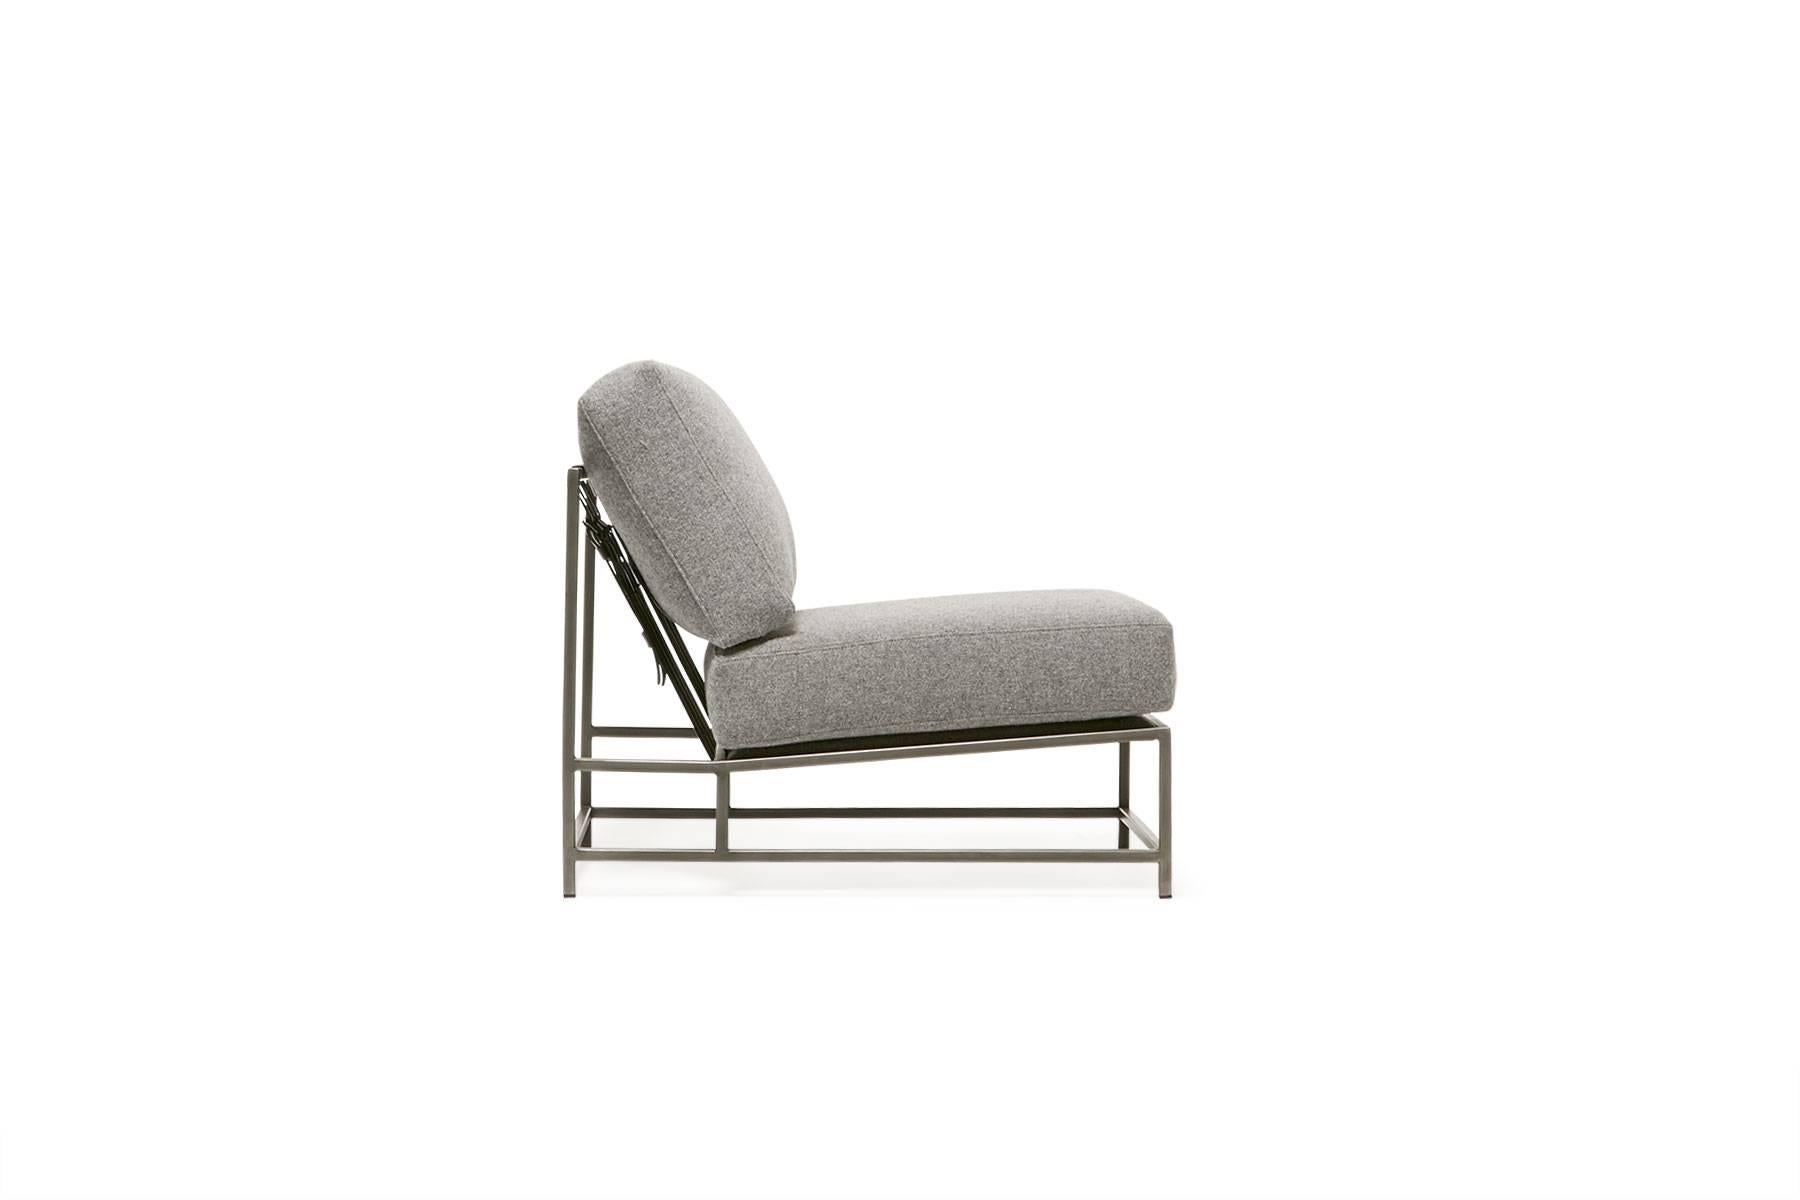 Sleek and refined, the Inheritance Chair is a great addition to nearly any space.  

This variation is upholstered in a plush grey wool. The foam seat cushions have been wrapped in polyfiber, allowing for a soft and comfortable lounge experience.